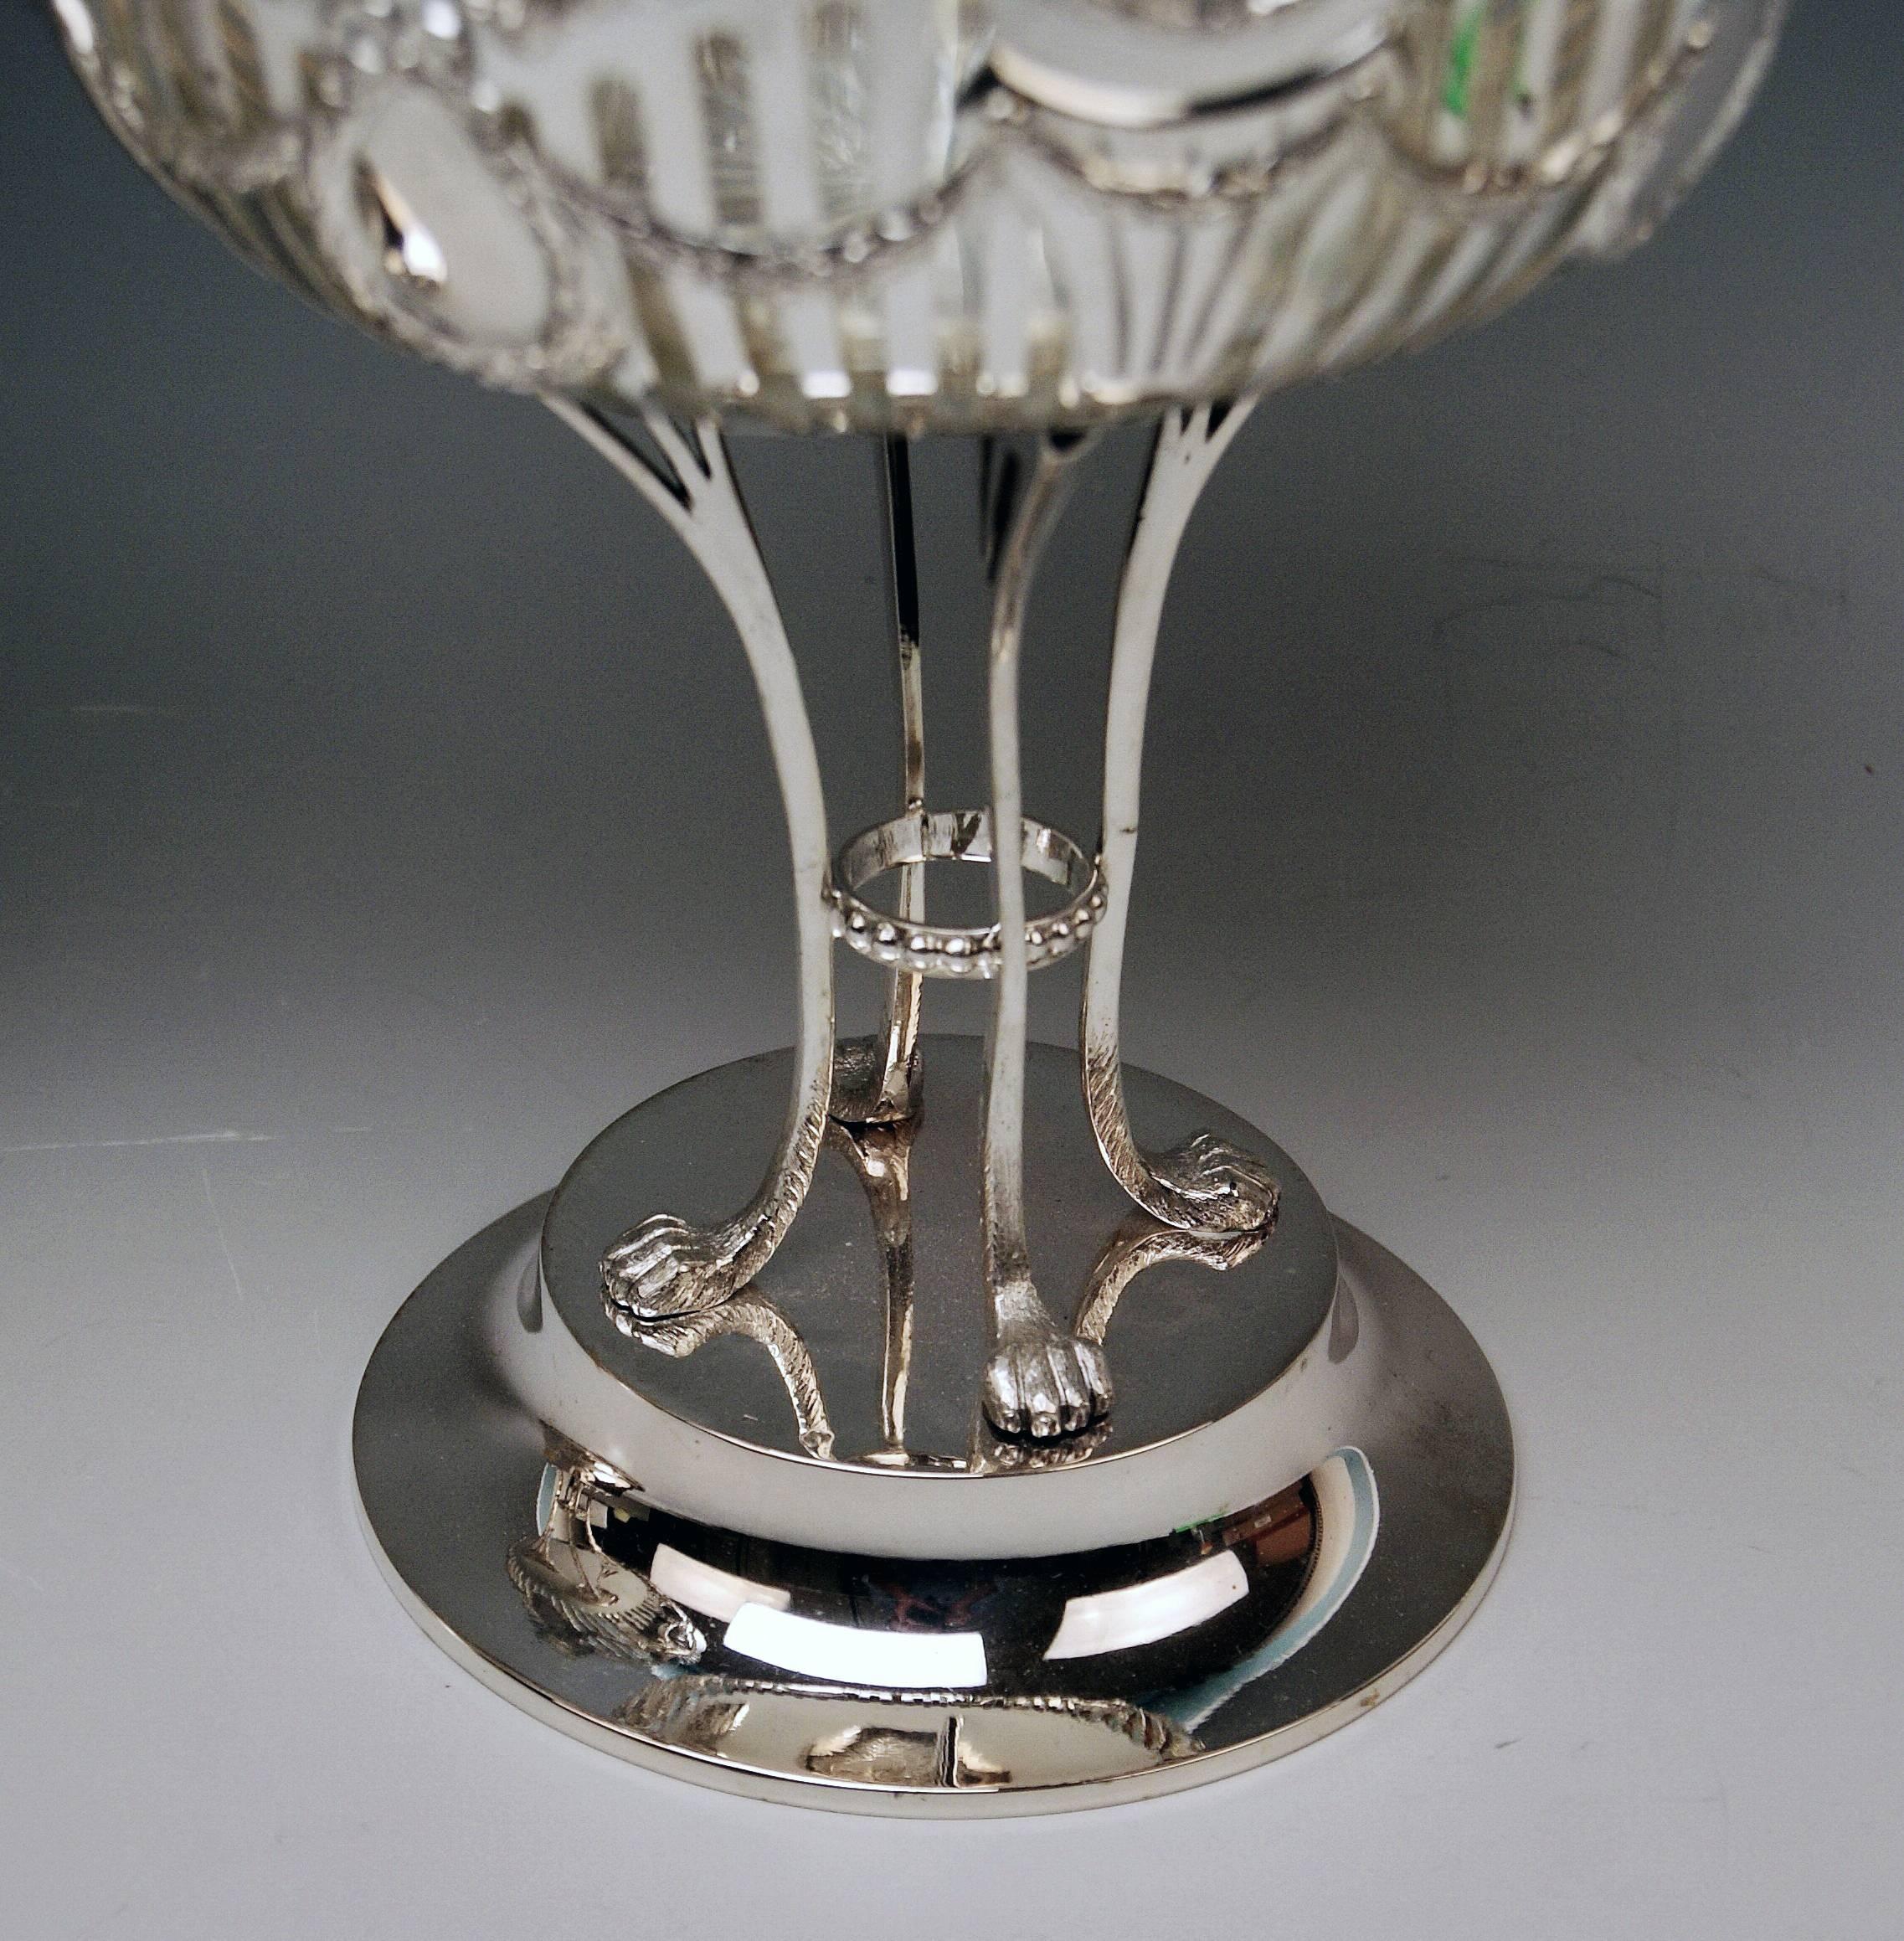 Early 20th Century Silver Vienna Pair of Fruitbowls Centrepieces Art Nouveau by Ferdinand Vogl 1914